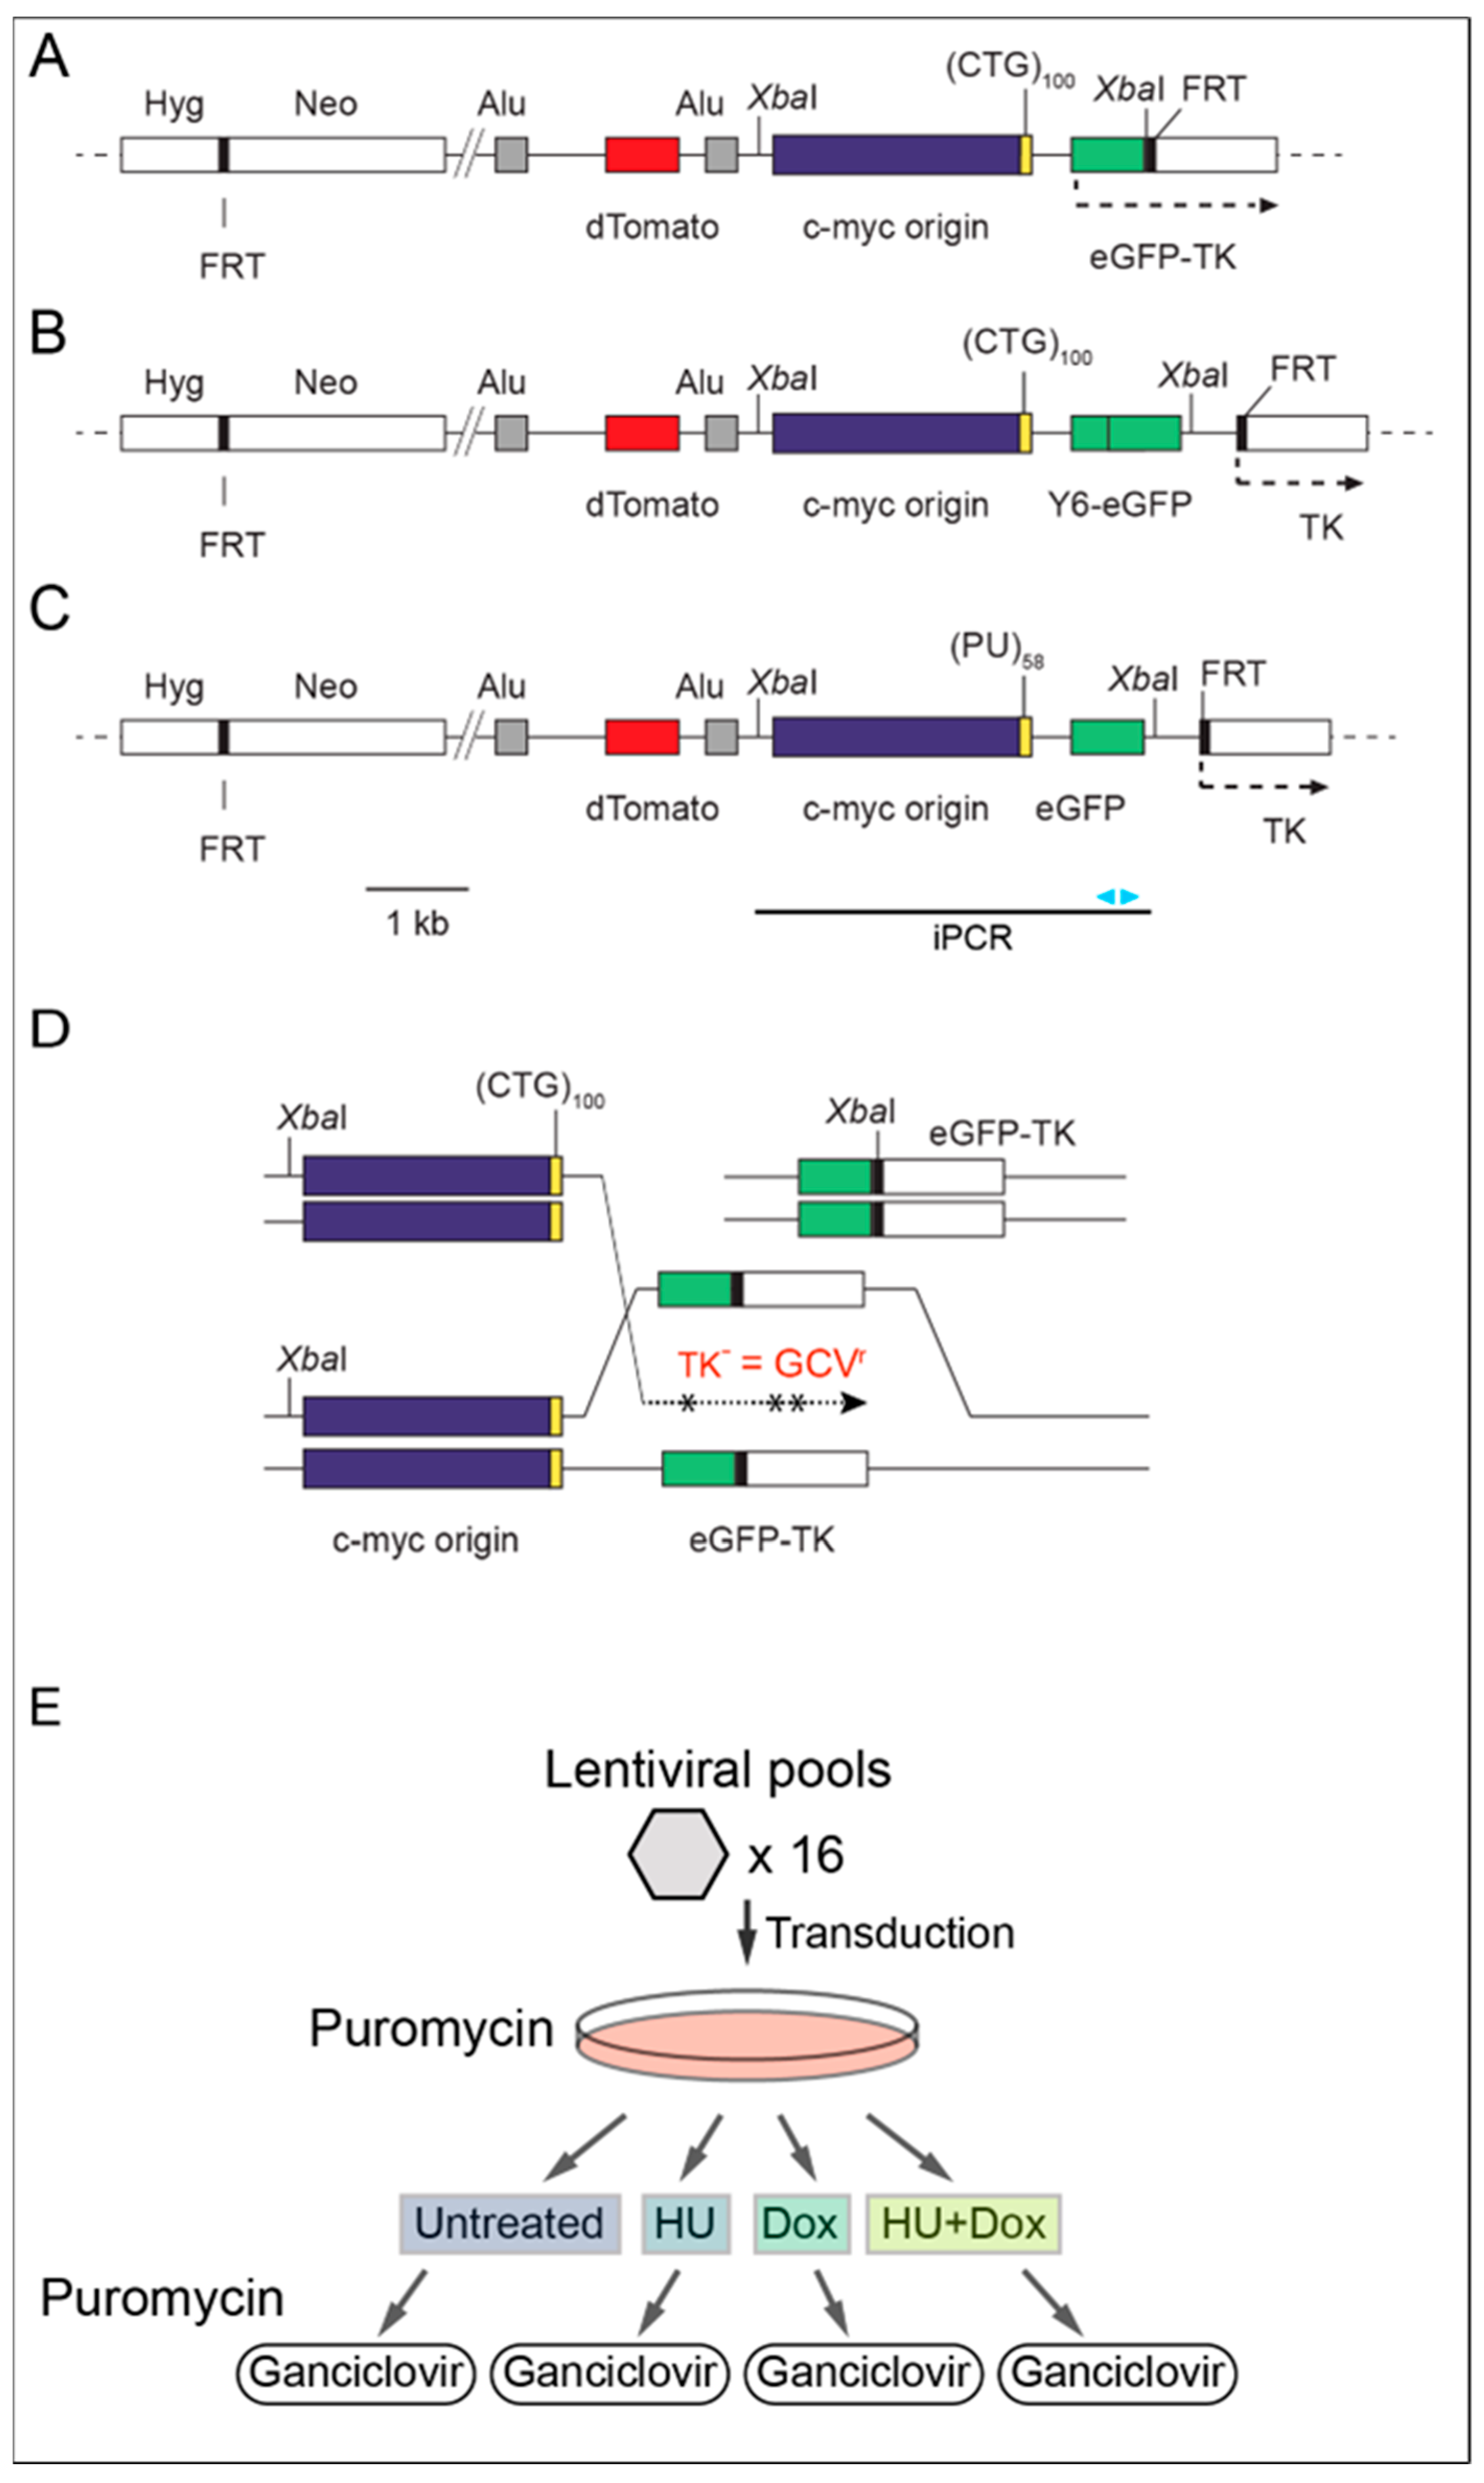 Sinario of the evolution of the function of DL/DRC-related genes. The